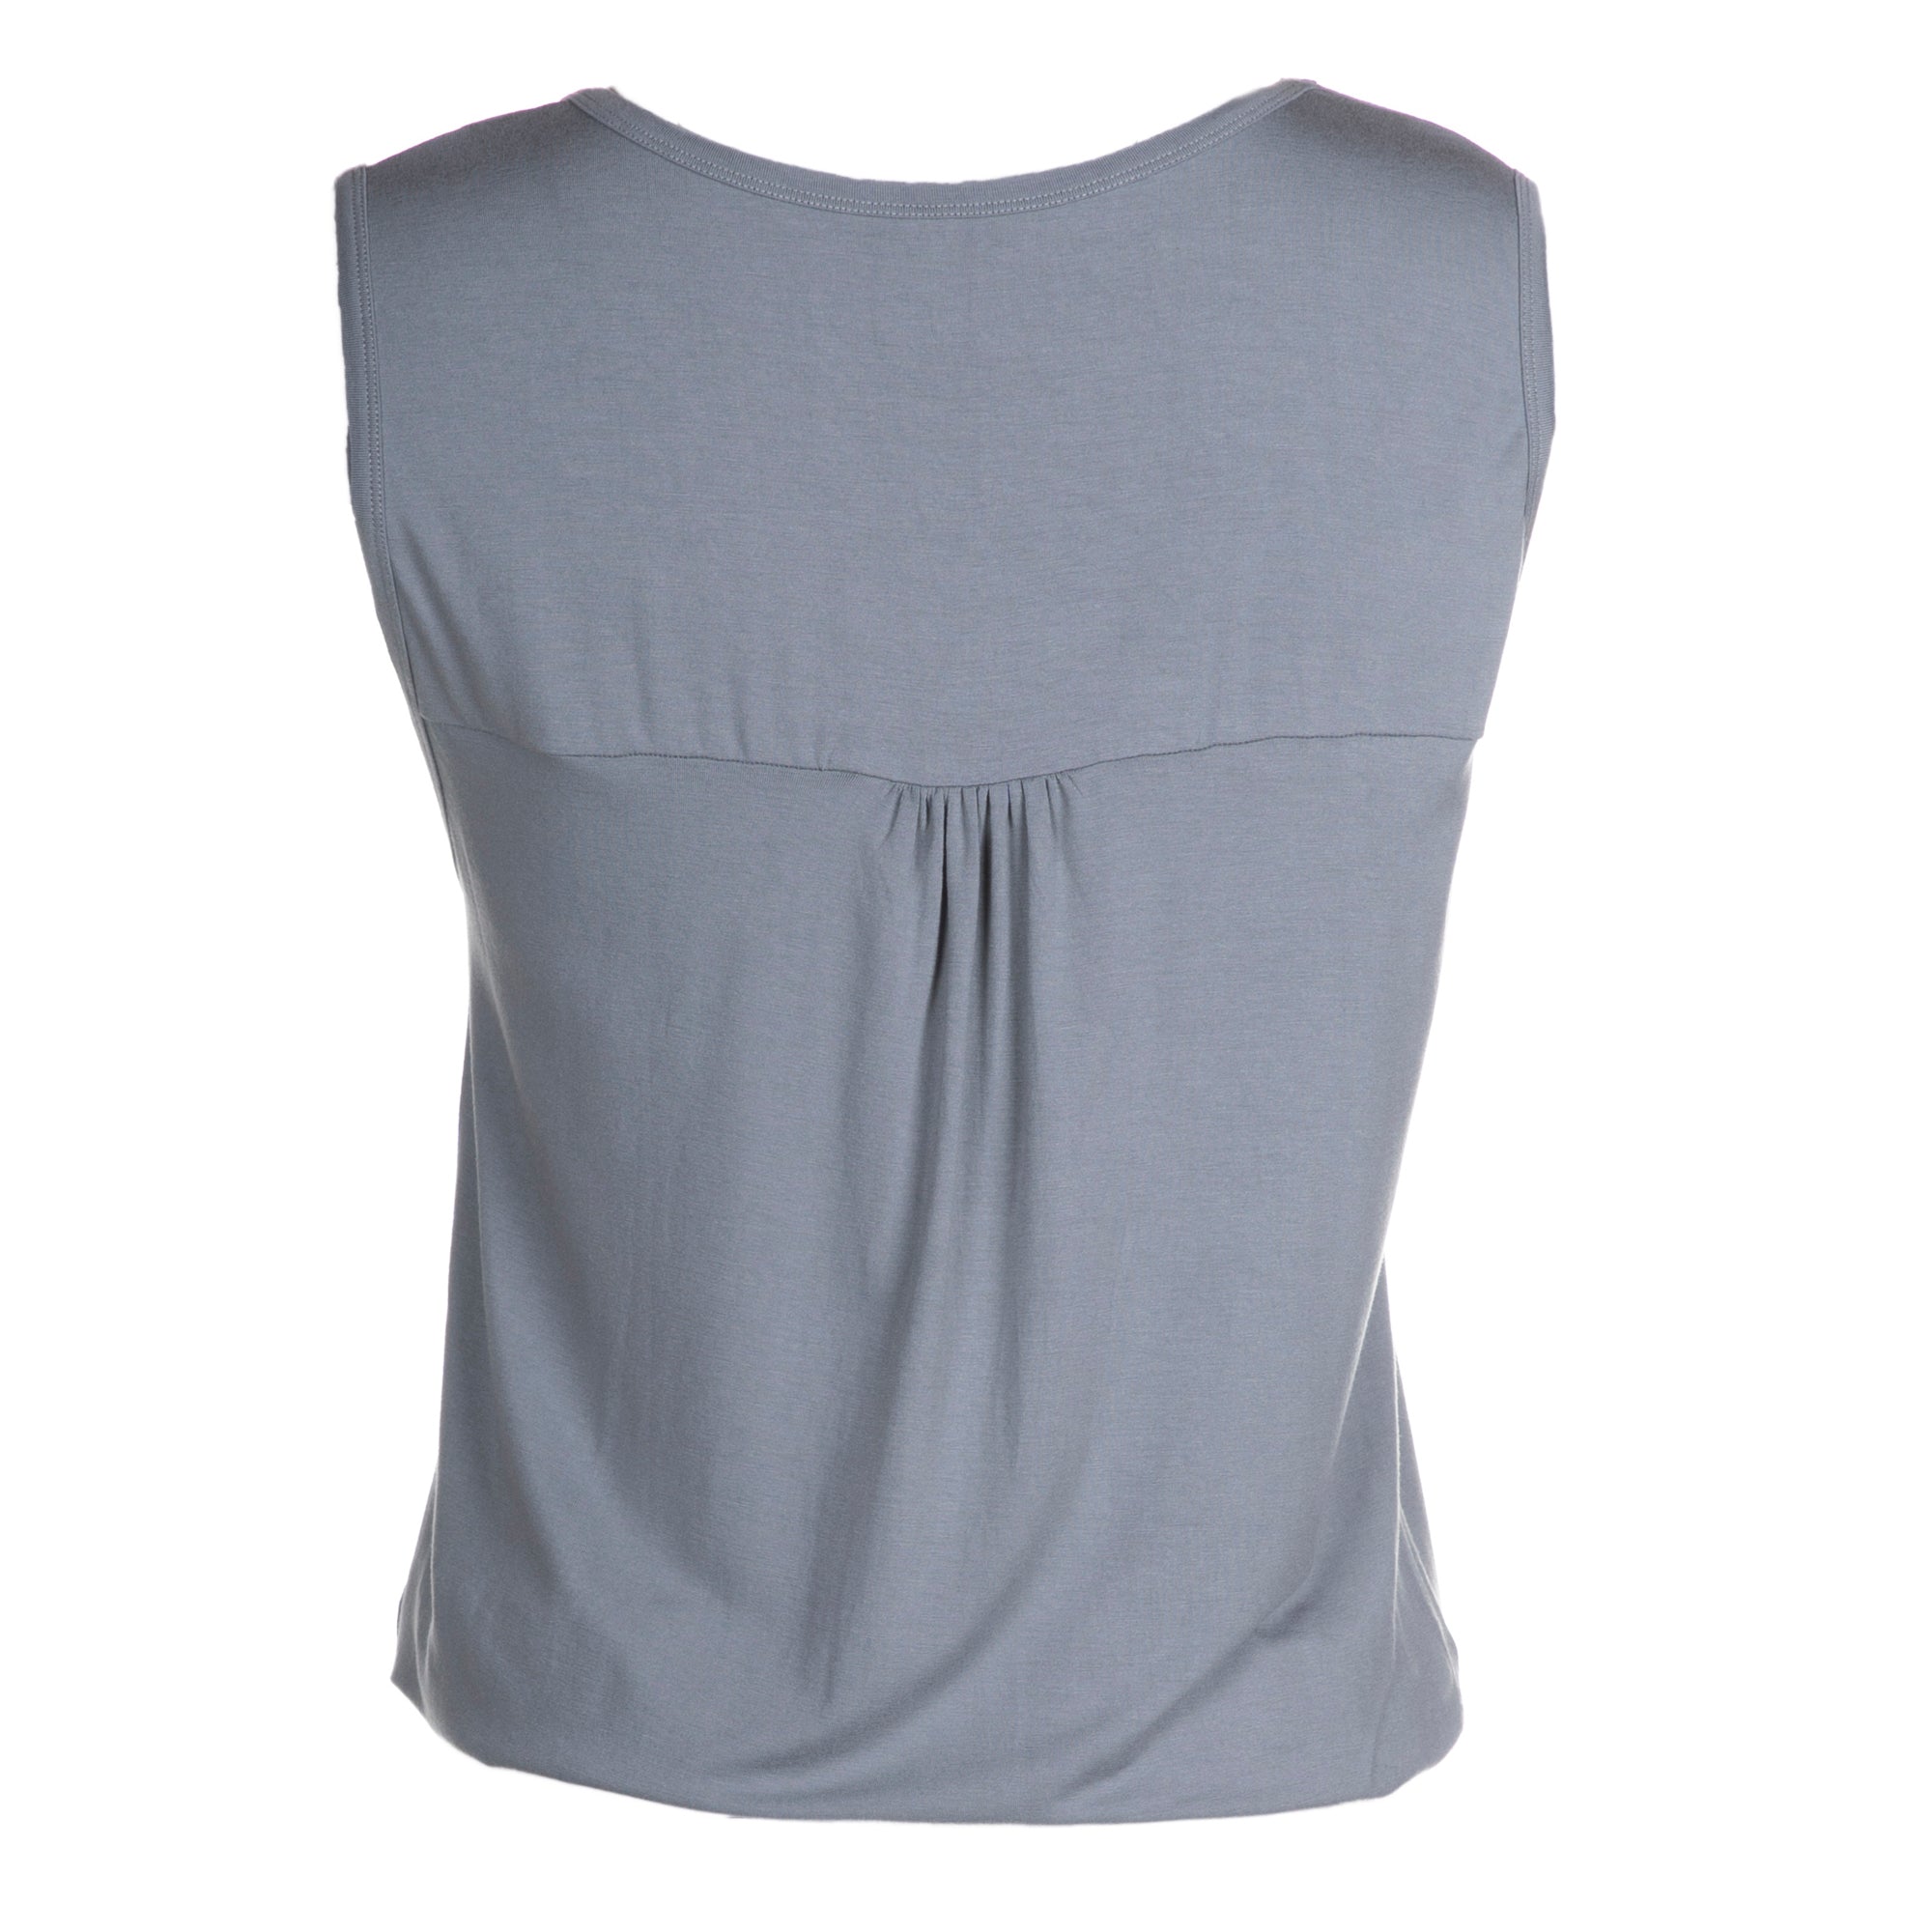 Yoga Shirt Every Day Grey (Size M/L)